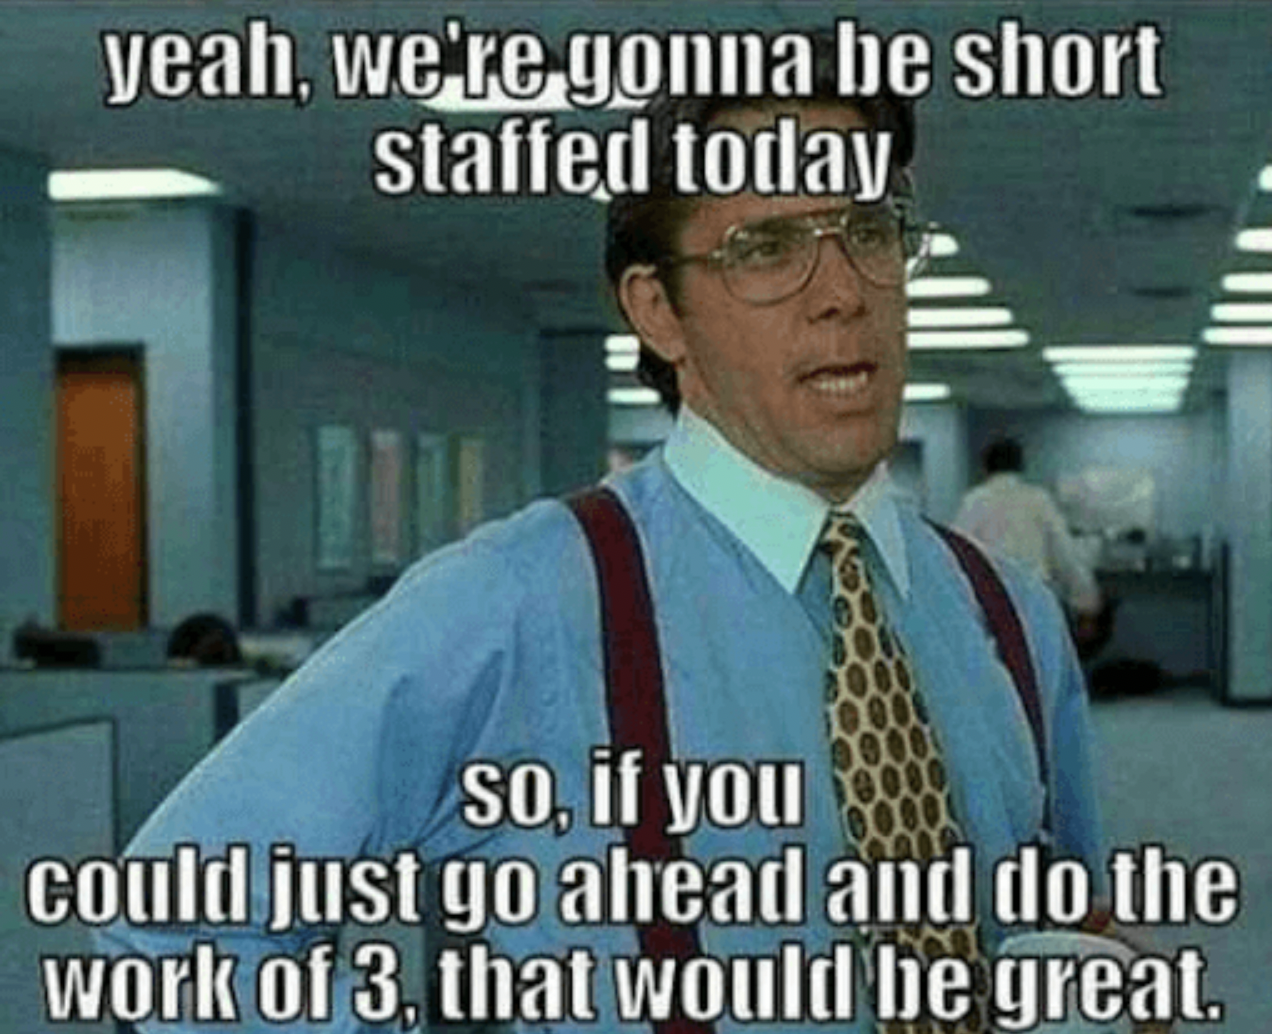 Work memes - office space memes - yeah, we're gonna be short staffed today so, if you could just go ahead and do the work of 3, that would be great.